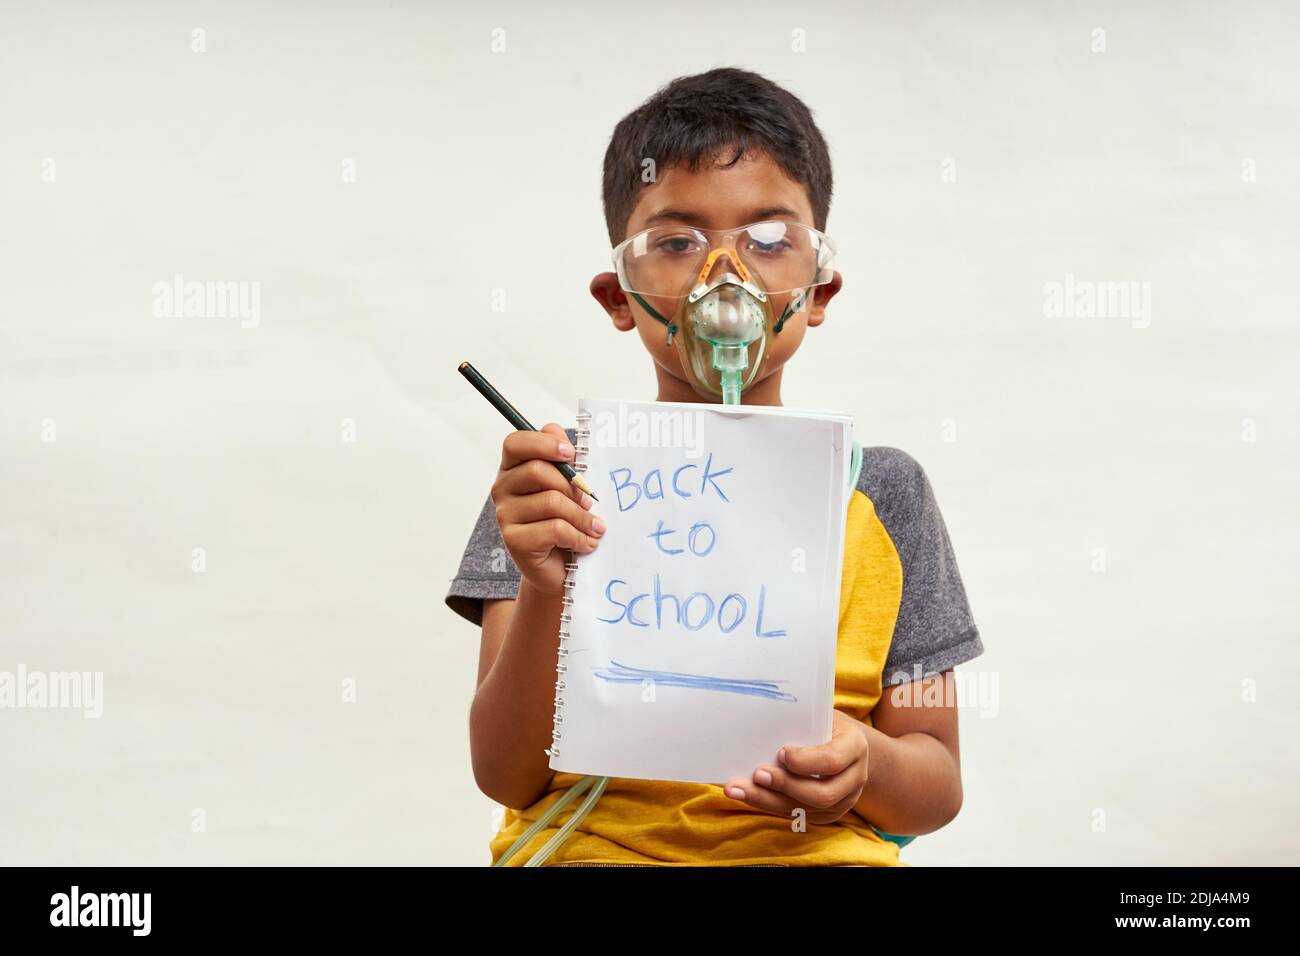 Schoolboy just bored of online classes and wanted Back to school. Home Education concepts Stock Photo